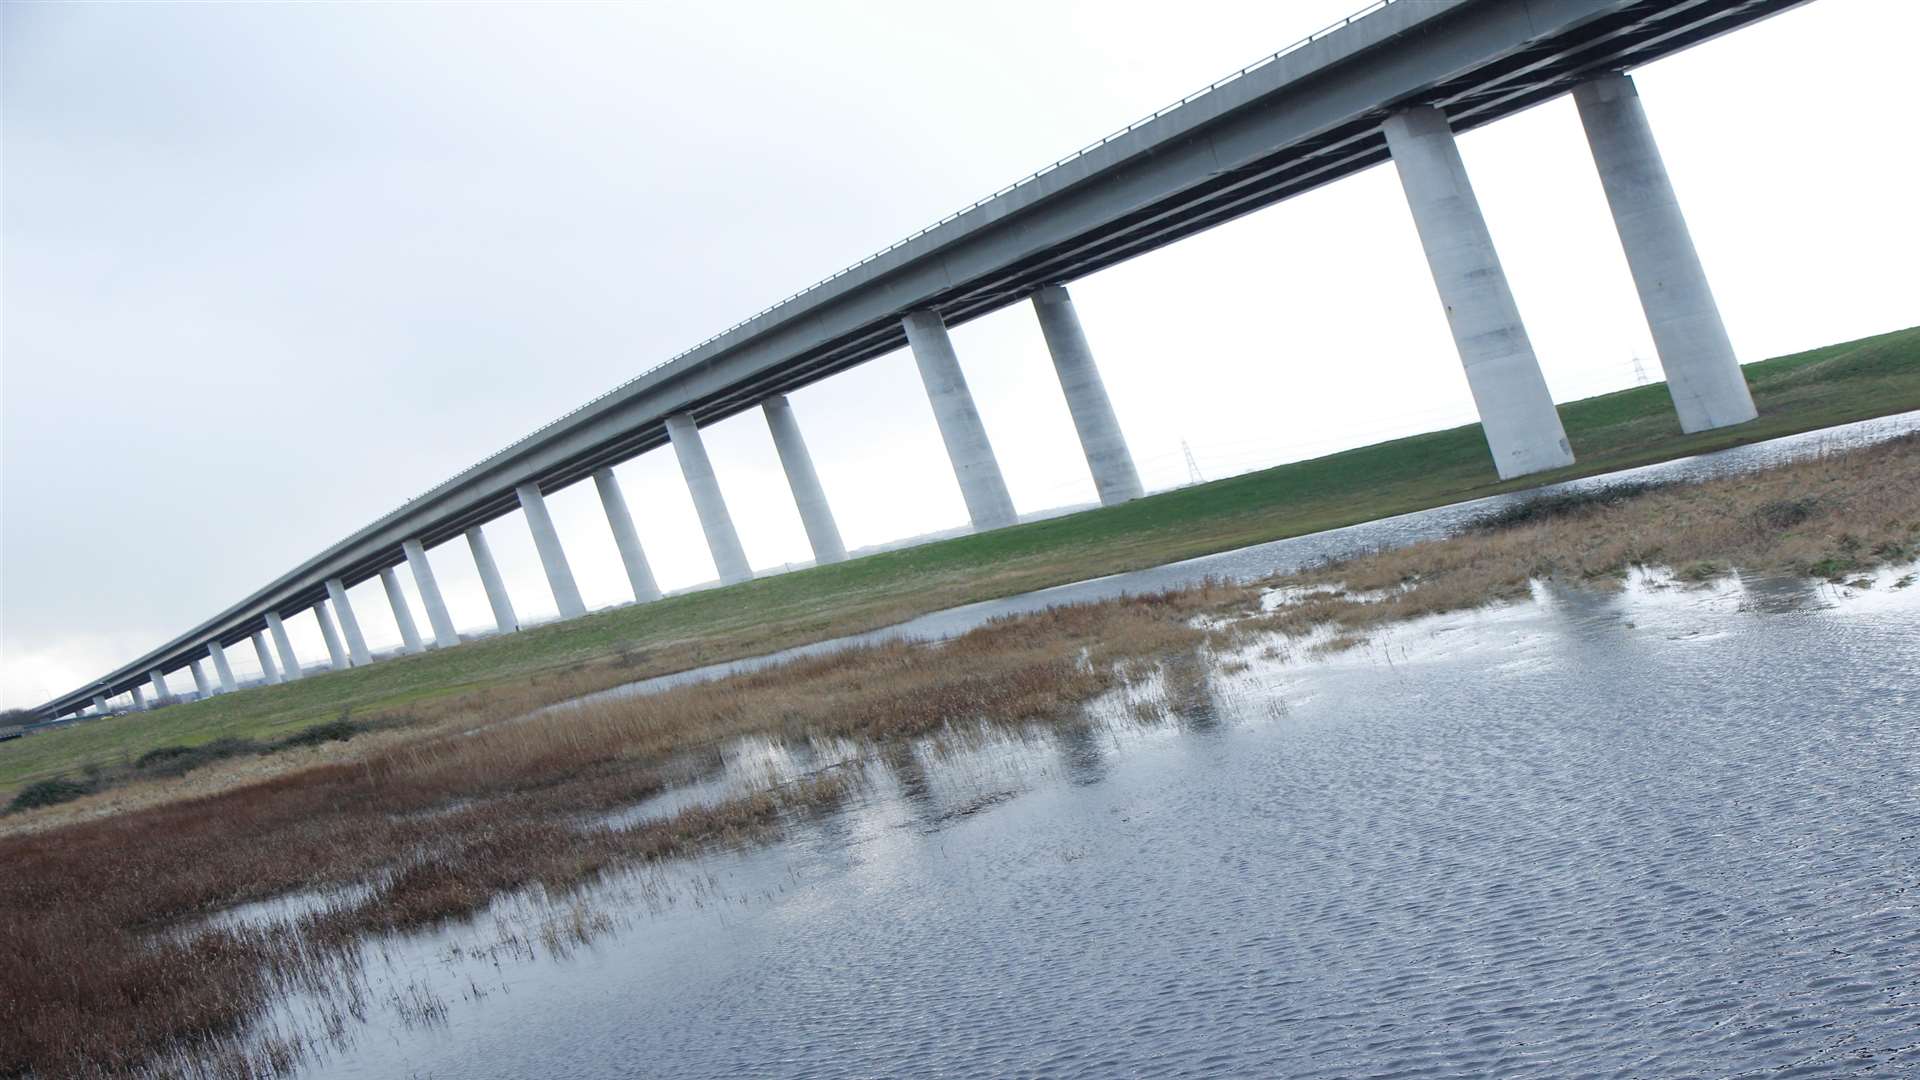 The Sheppey Crossing has been closed this morning